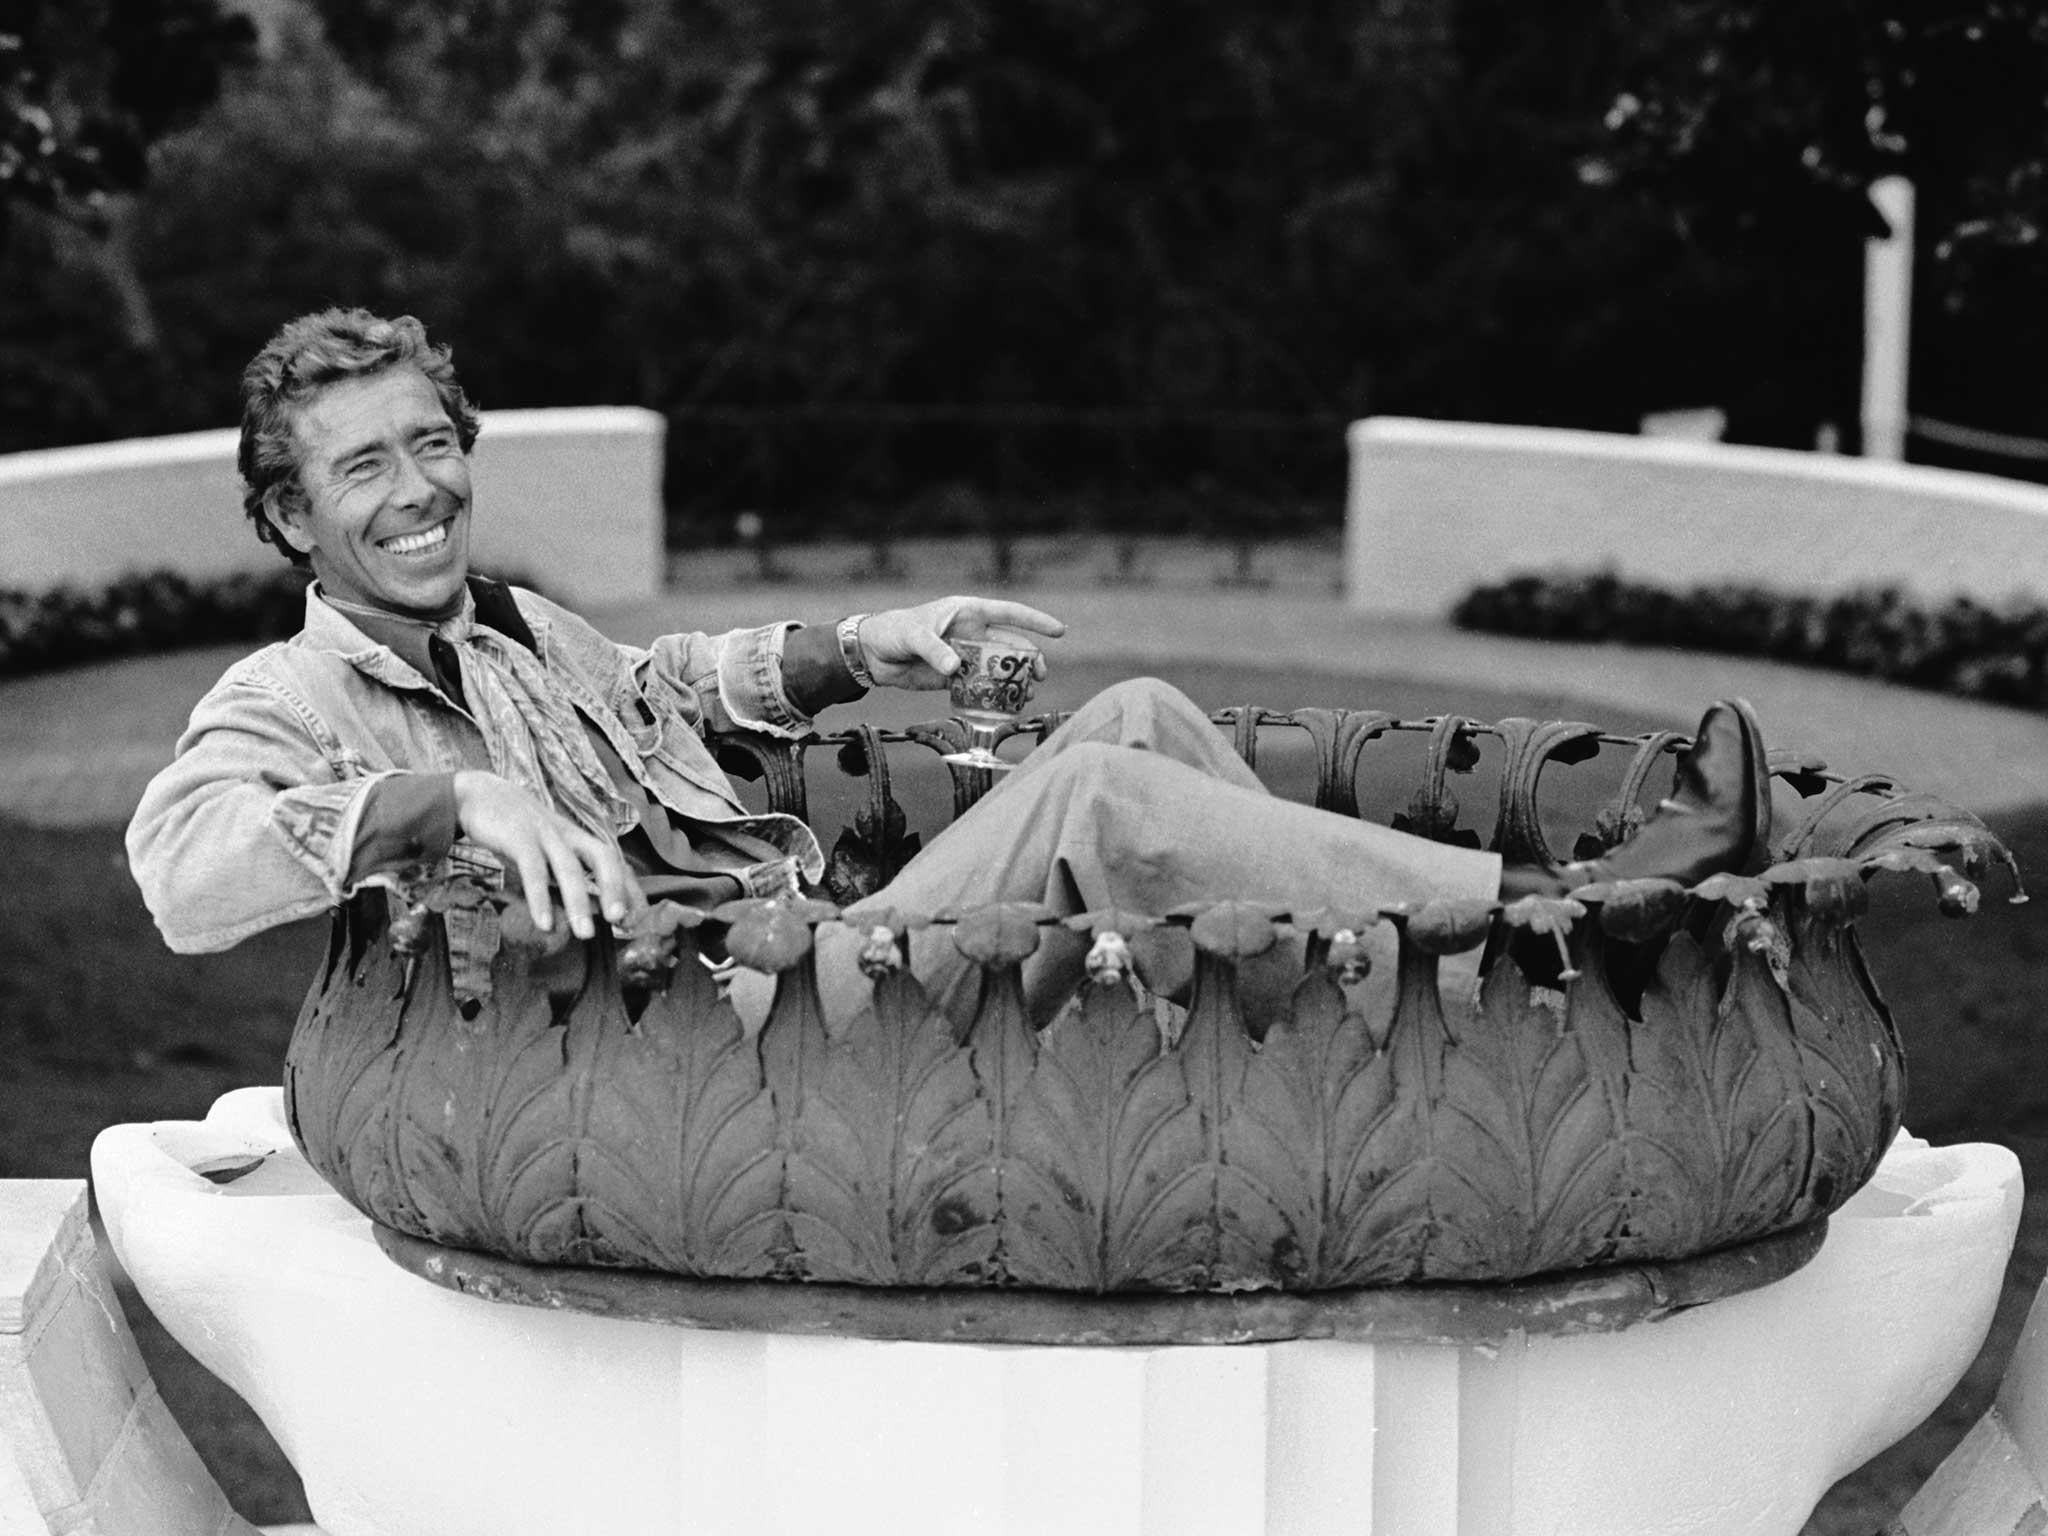 Lord Snowdon, pictured in Peter Sellers's garden in the mid-1970s, was known for being a ‘free spirit’